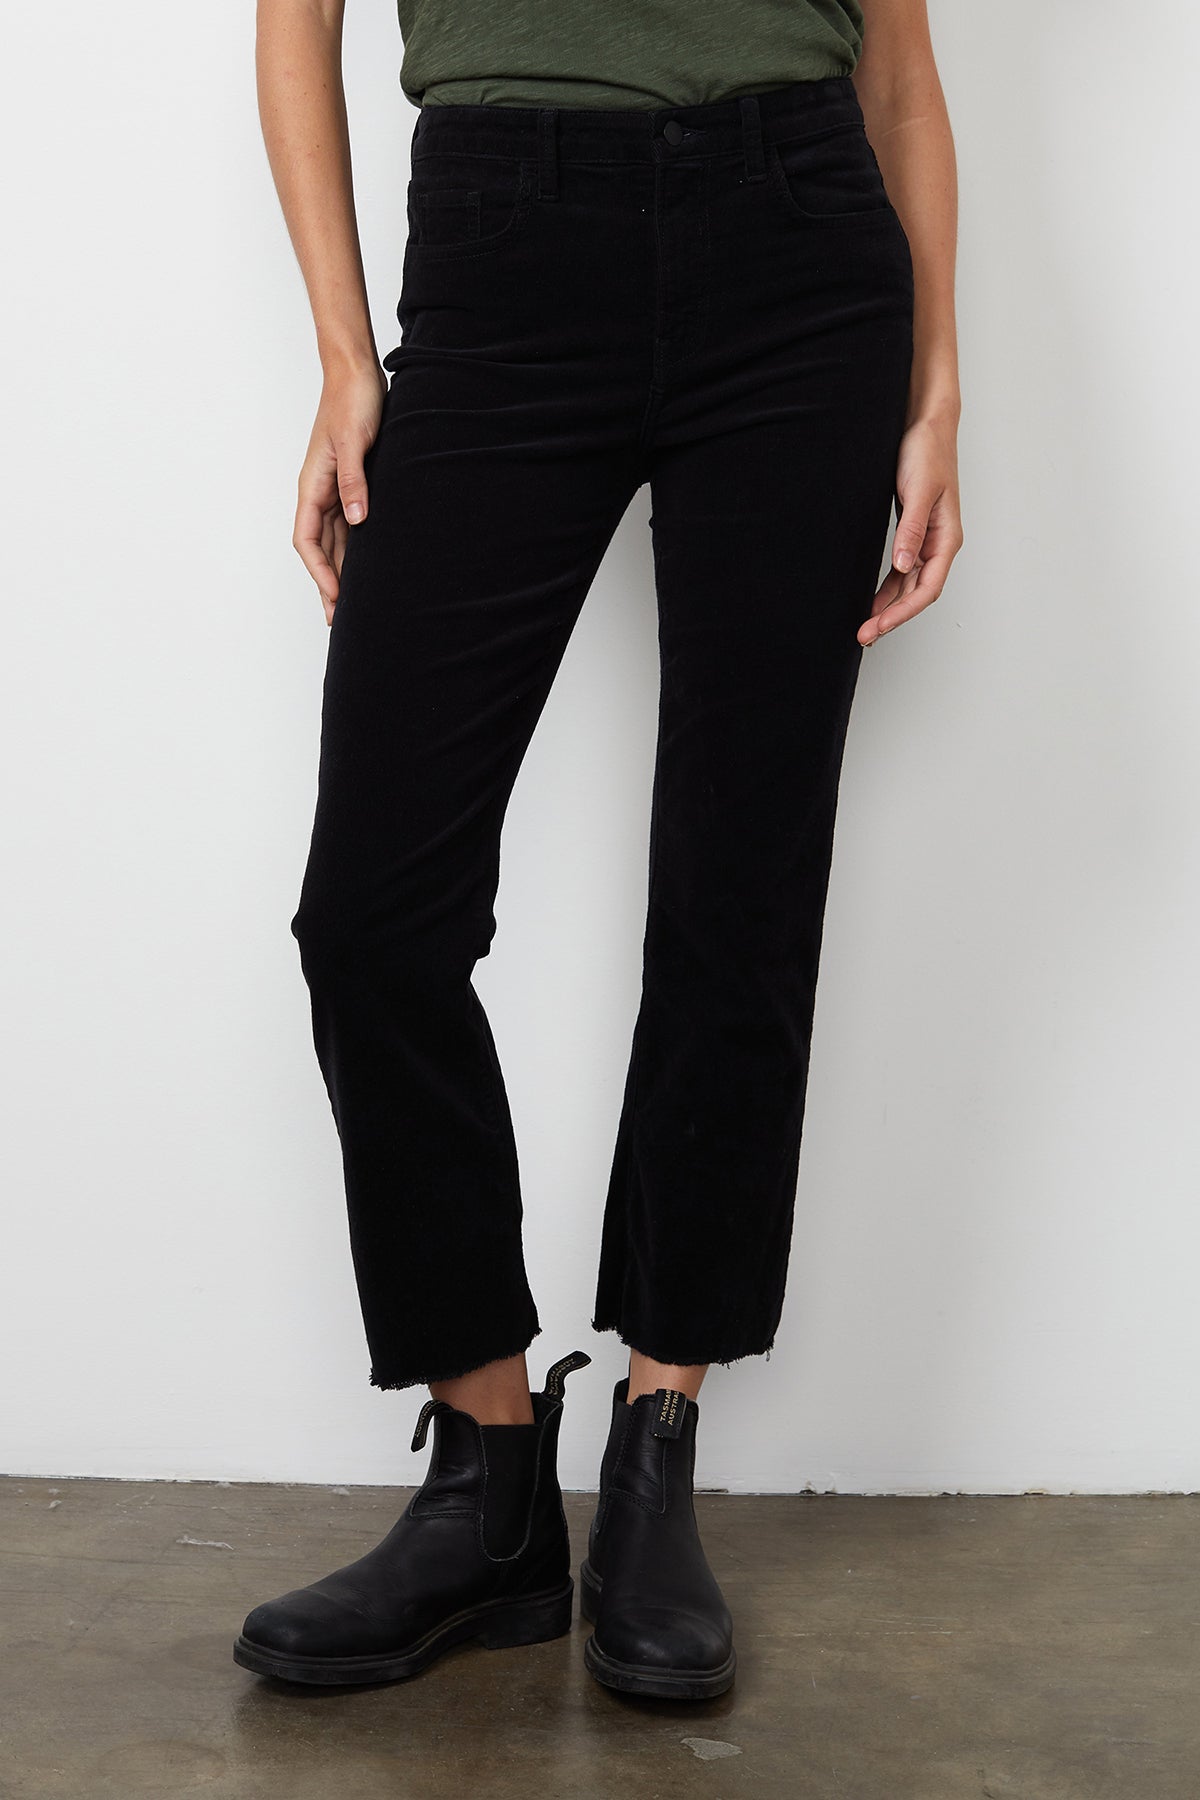 A woman wearing Velvet by Graham & Spencer CANDACE CORDUROY HIGH RISE CROP JEAN with a cropped cuff.-14889566175425